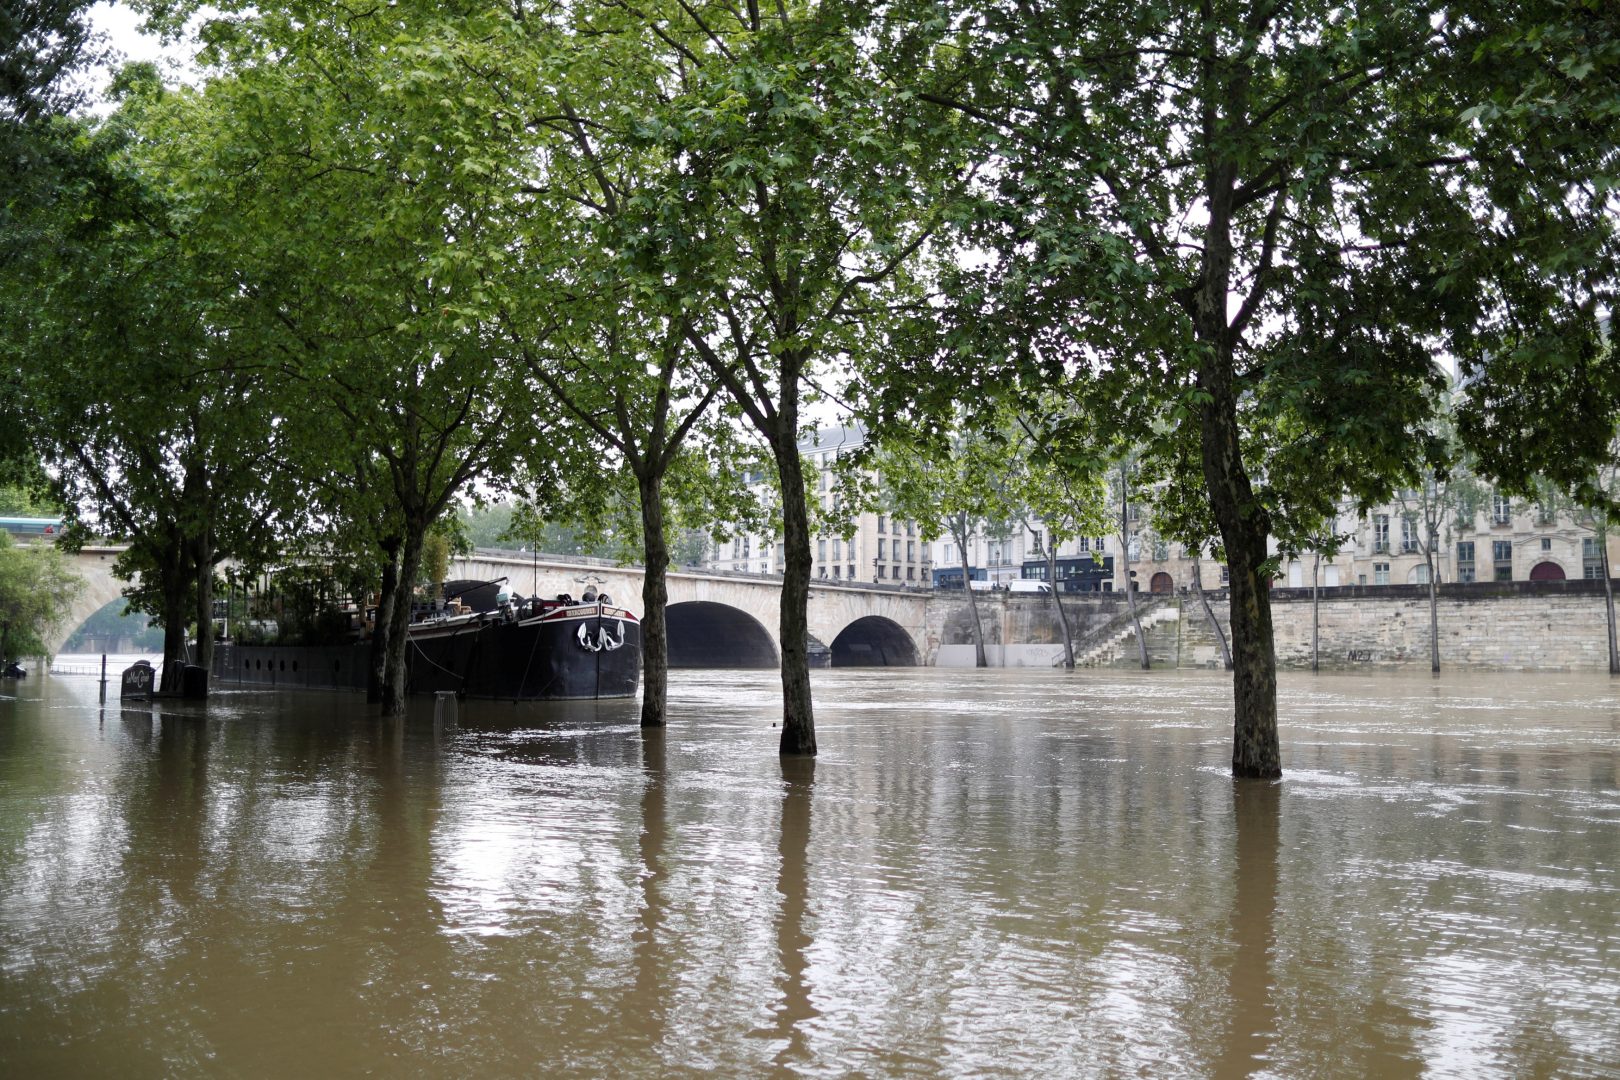 General view of the flooded river-side of the River Seine in central Paris with the 'Ile Saint-Louis' in the background, France, June 1, 2016. REUTERS/Charles Platiau